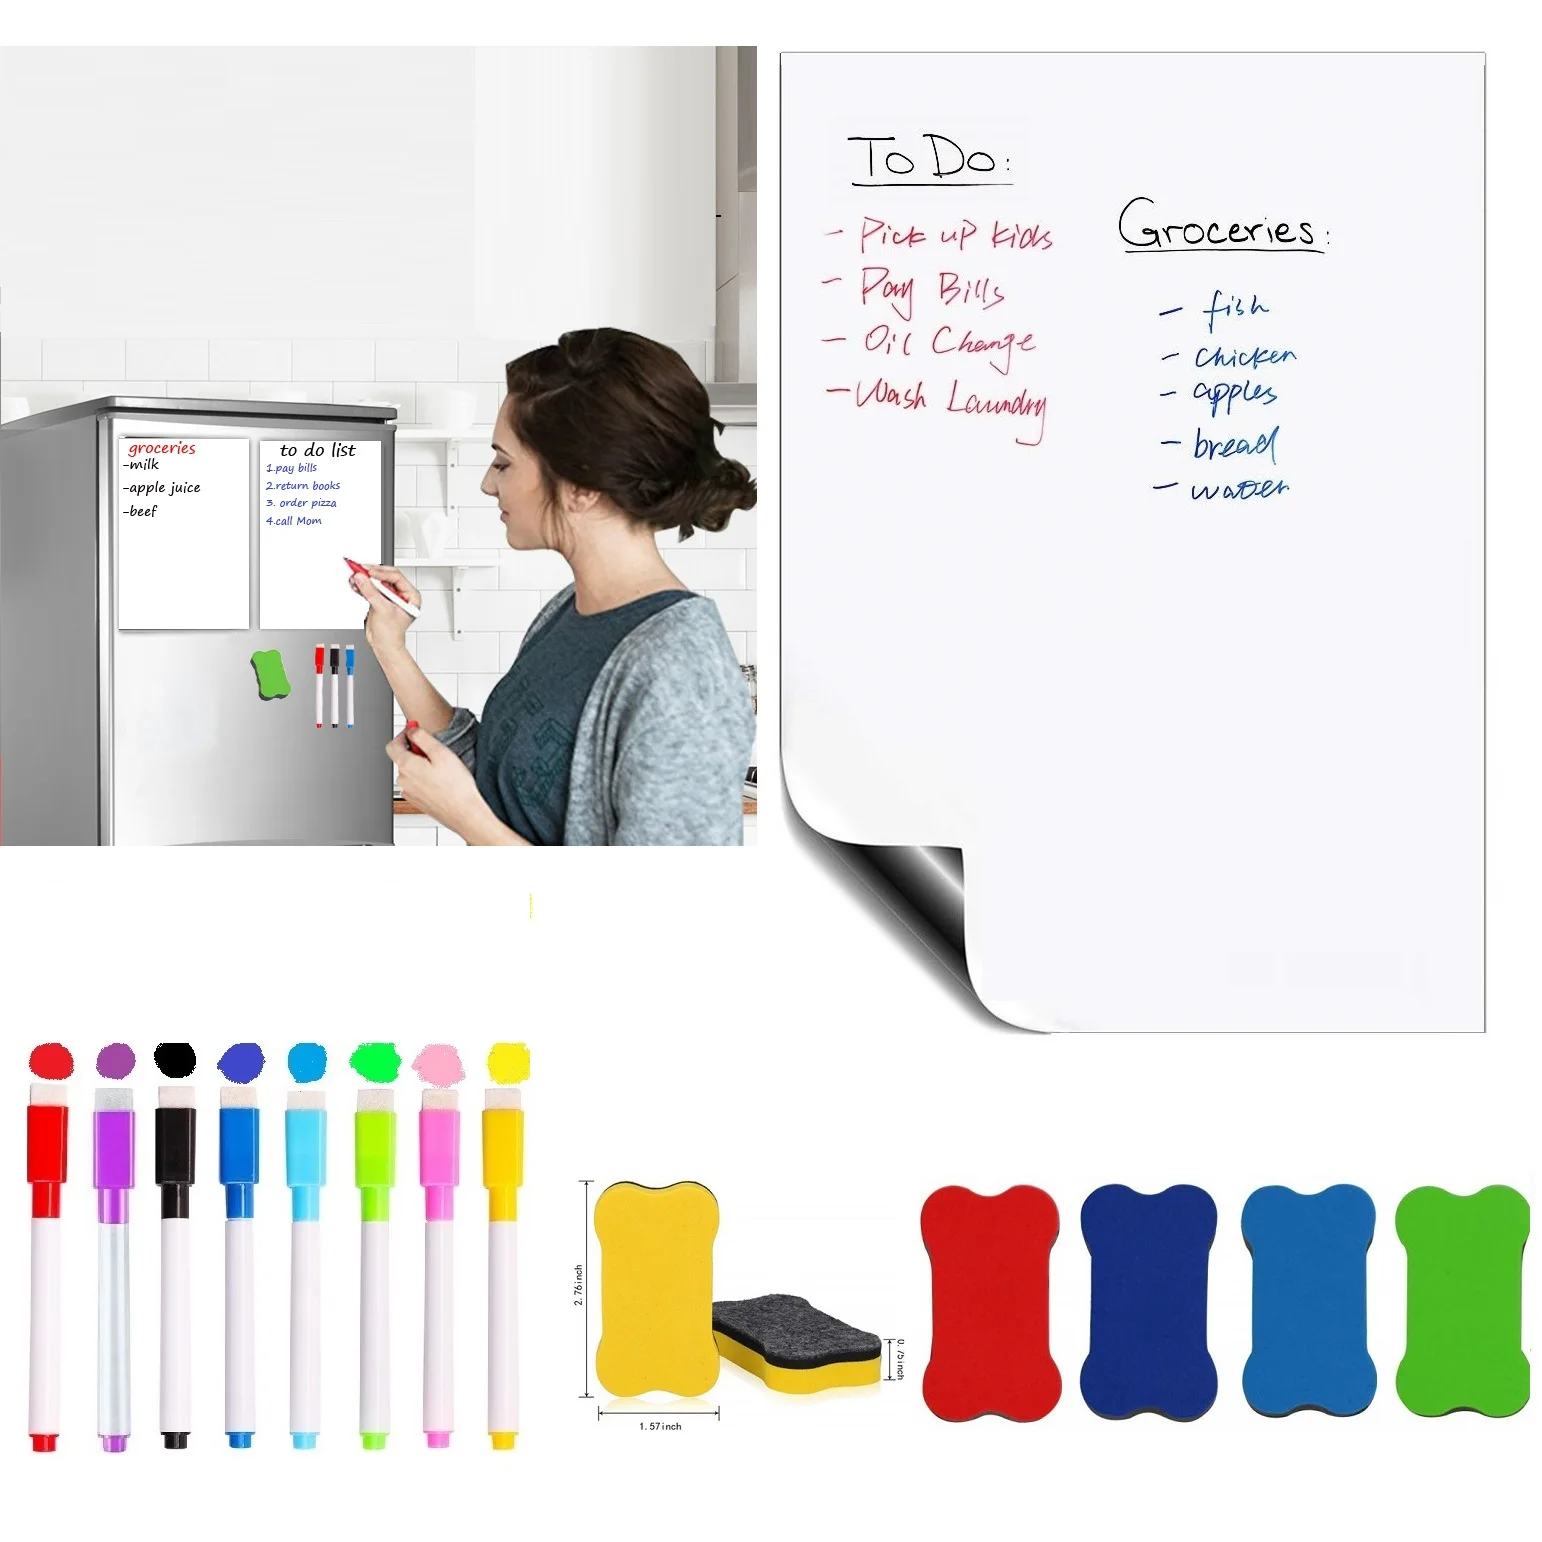 Kglobal Soft Fridge Magnets Flexible Mini A4 Whiteboard PET Film Message Board Magnetic Notes Refrigerator Memo Pad Magnetic Whiteboard 3 Markers Magnetic Eraser Included 